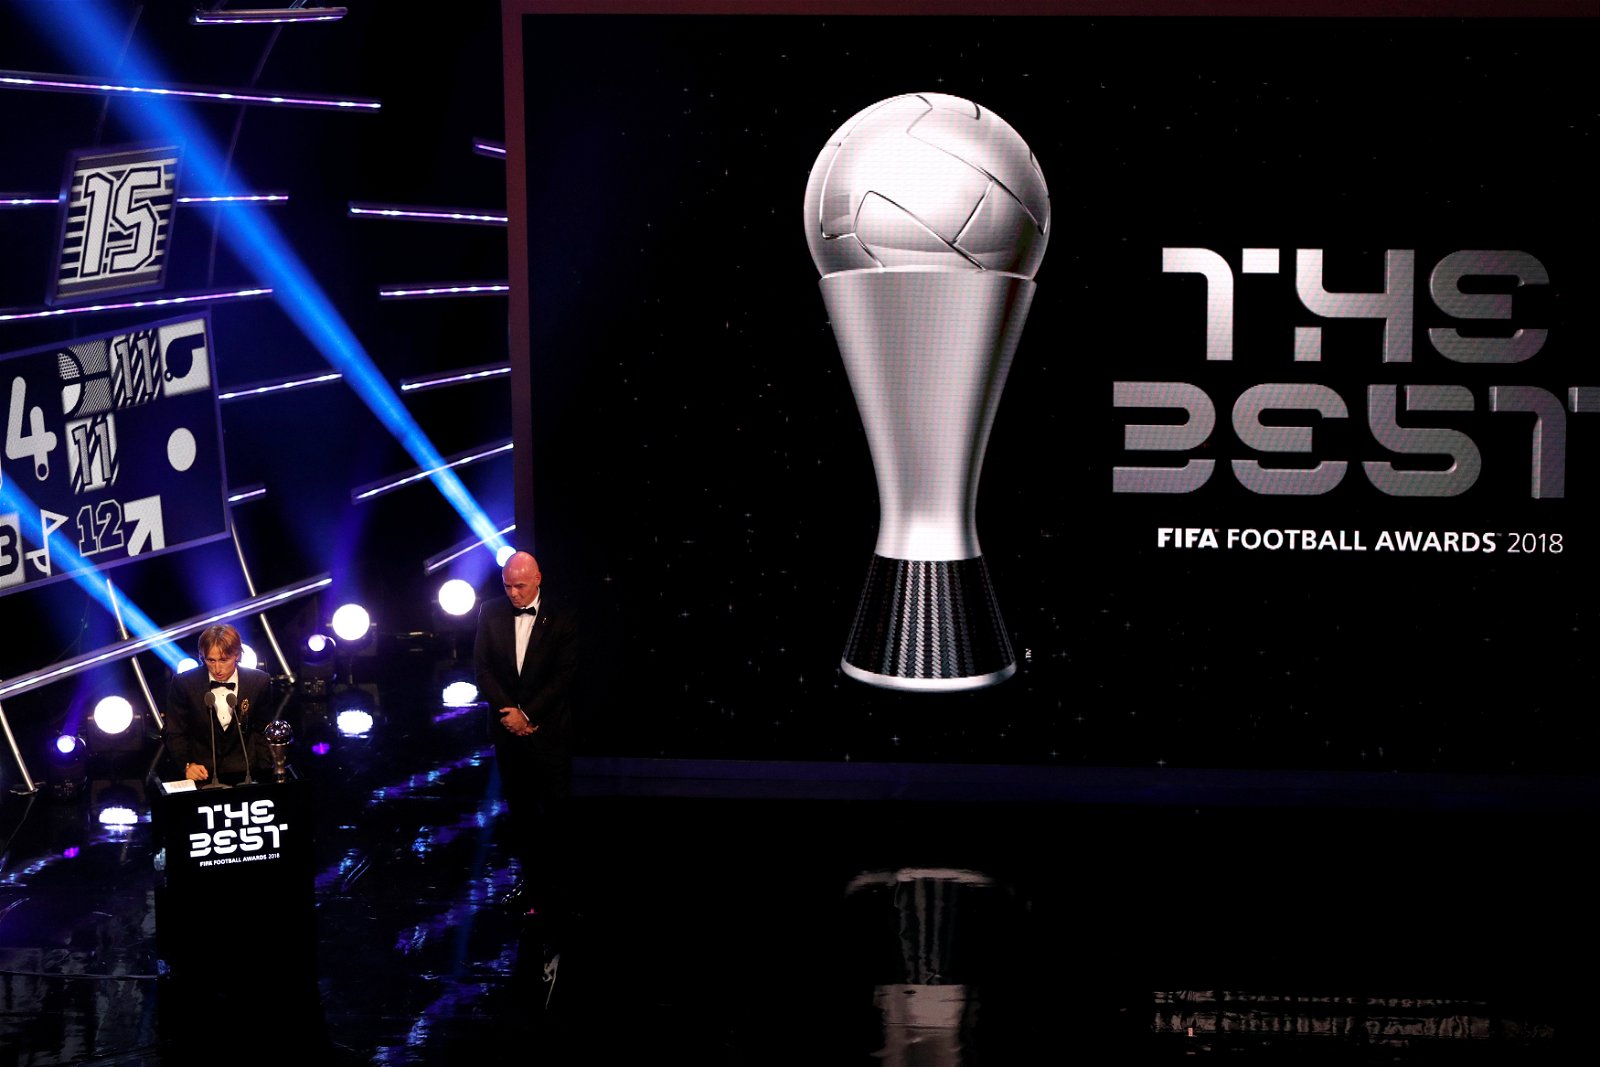 “The Best” FIFA Football Awards 2019 Nominees (Revealed)